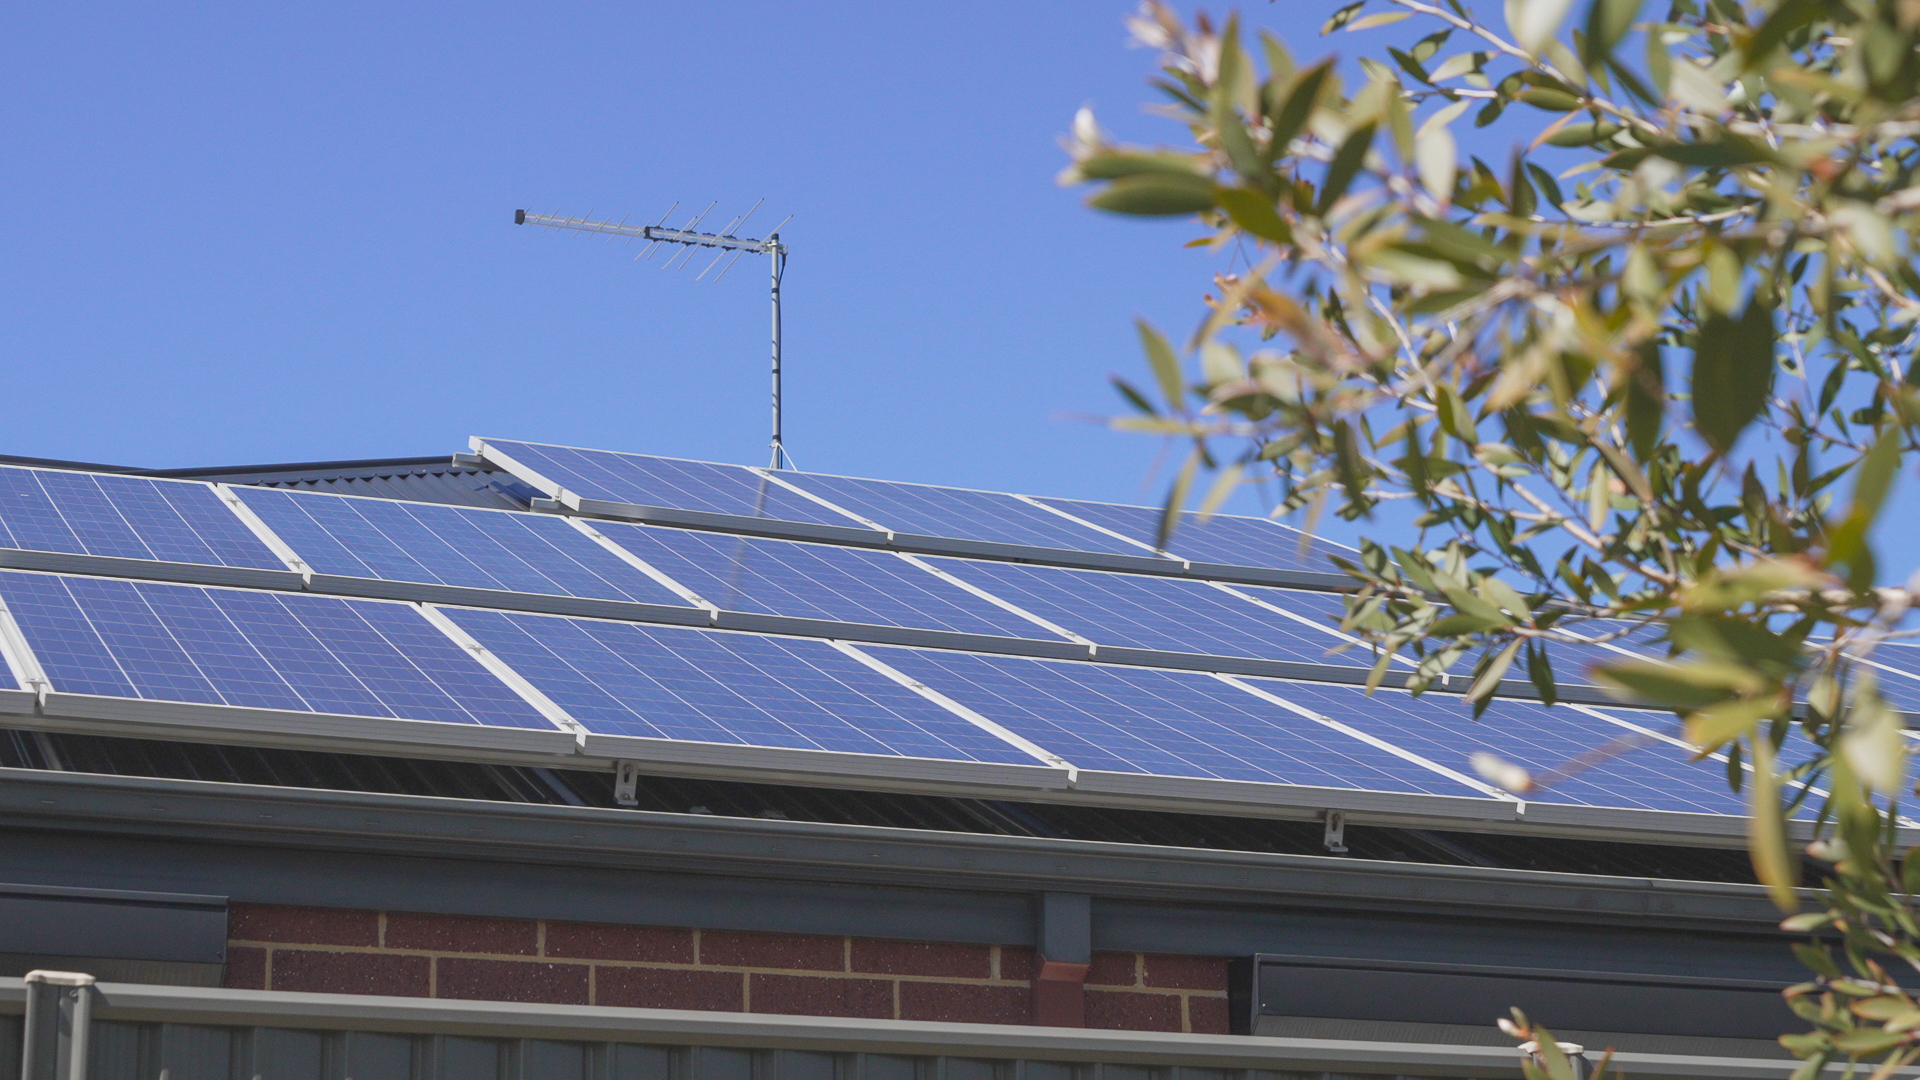 Residential house with solar panels in Harrisdale Western Australia